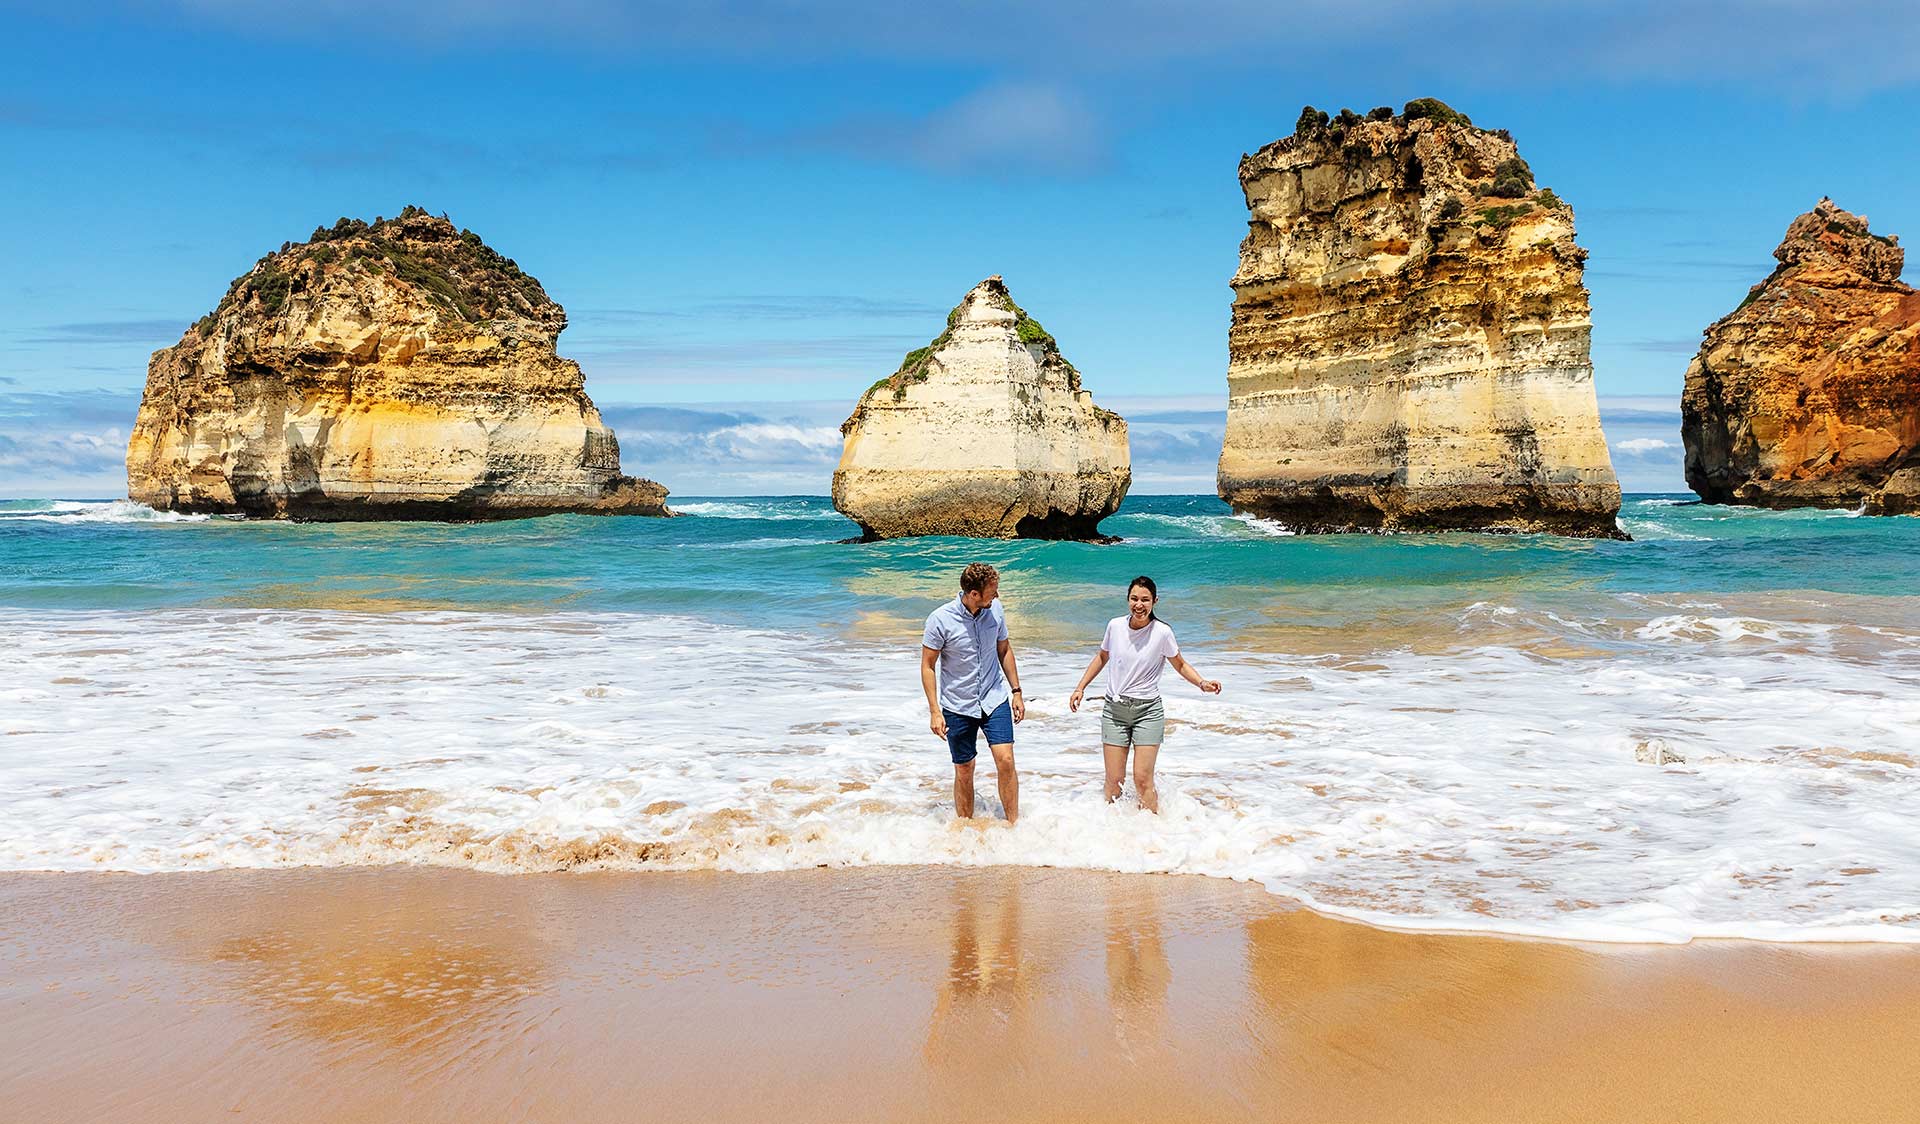 A man and woman play in shallow waters in front of the Twelve Apostles.